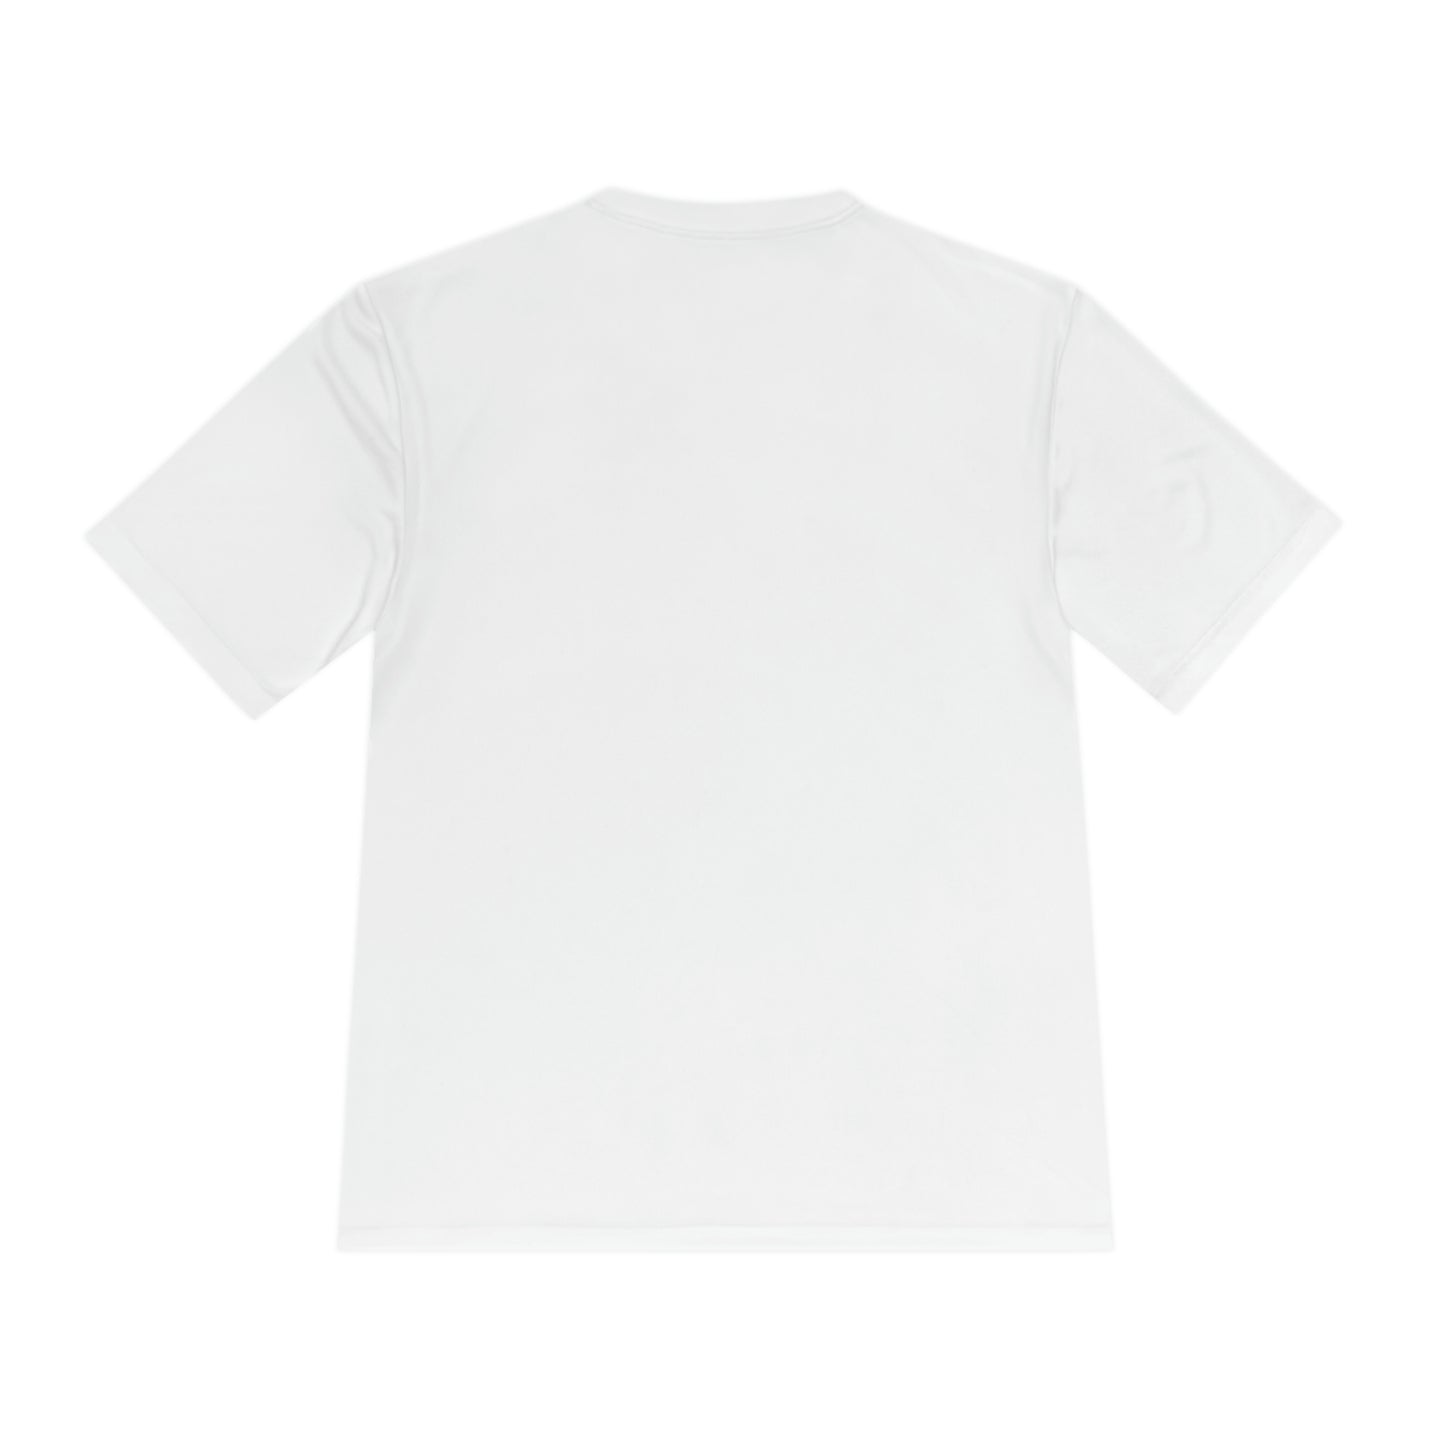 Flat back view of the White shirt